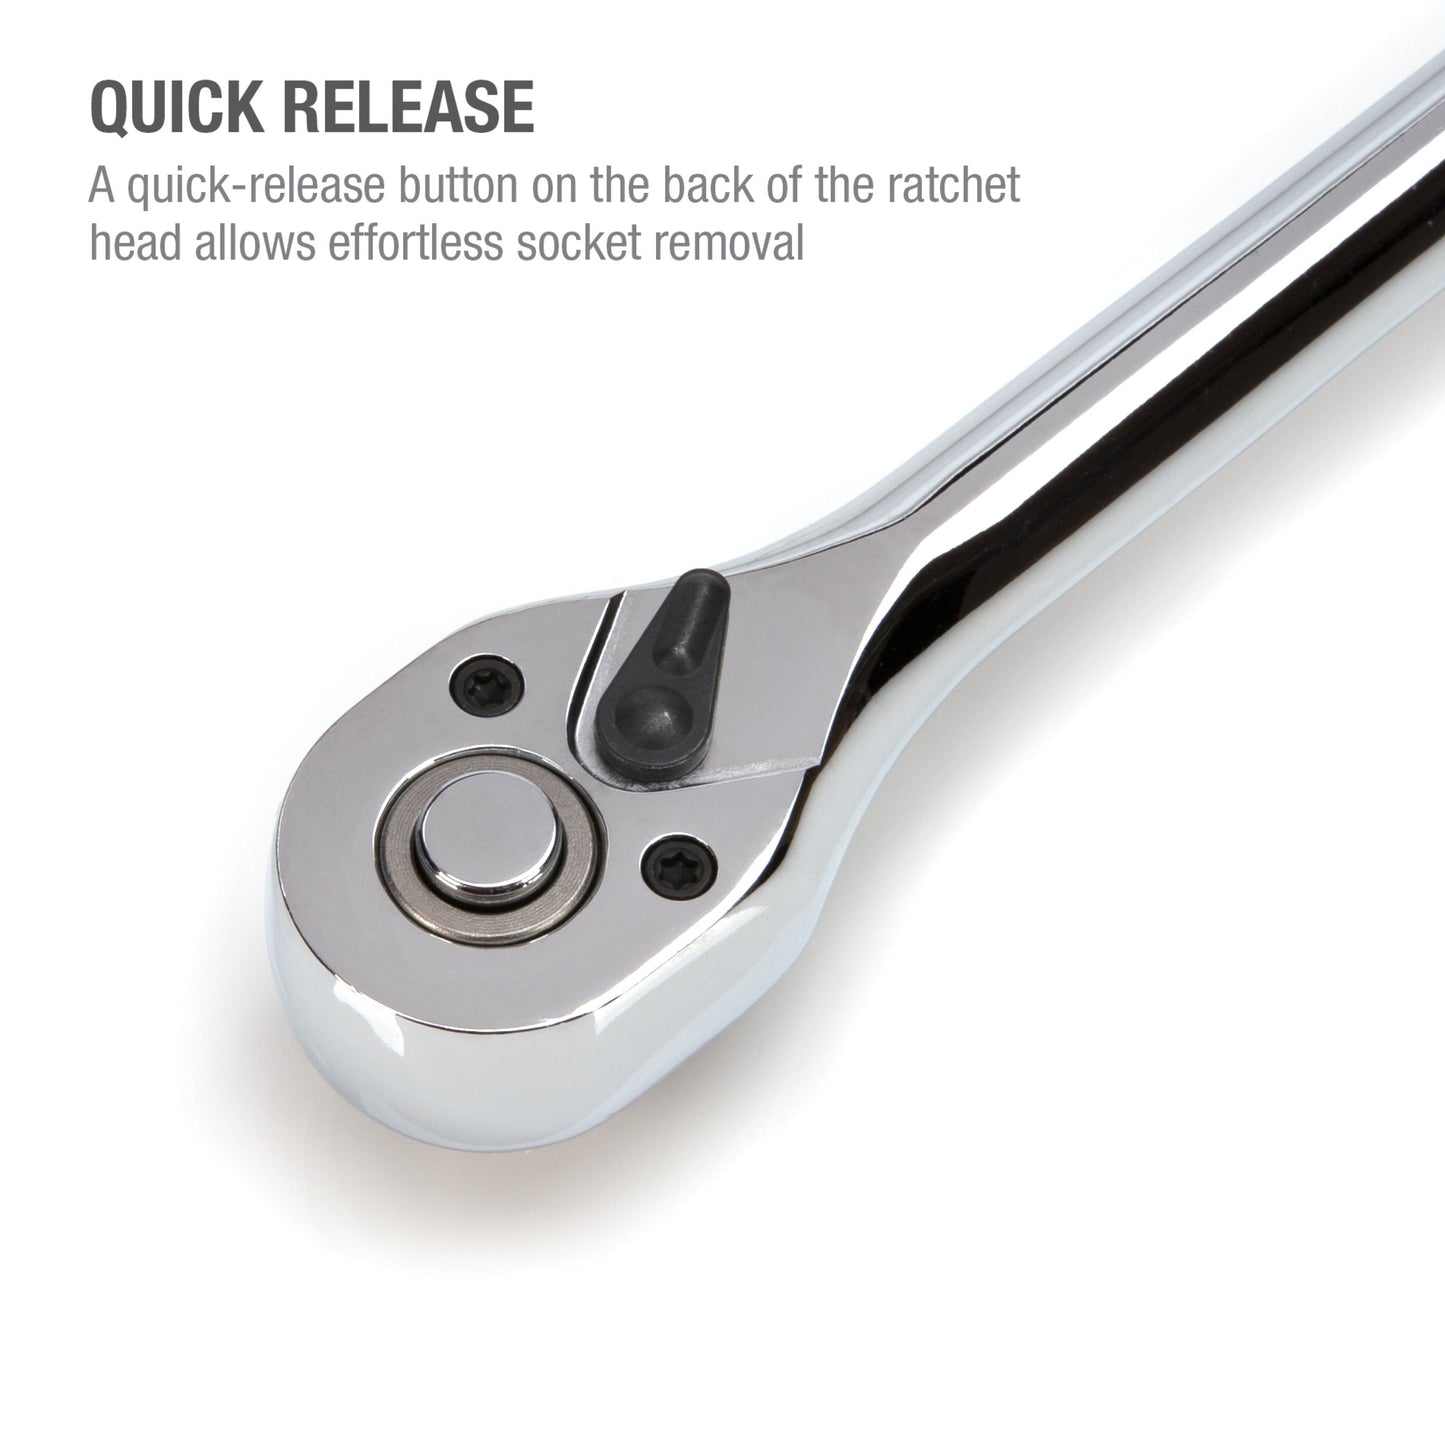 3/8-Inch Drive 72-Tooth Reversible Quick-Release Ratchet with 18-Inch Long Full Polish Handle